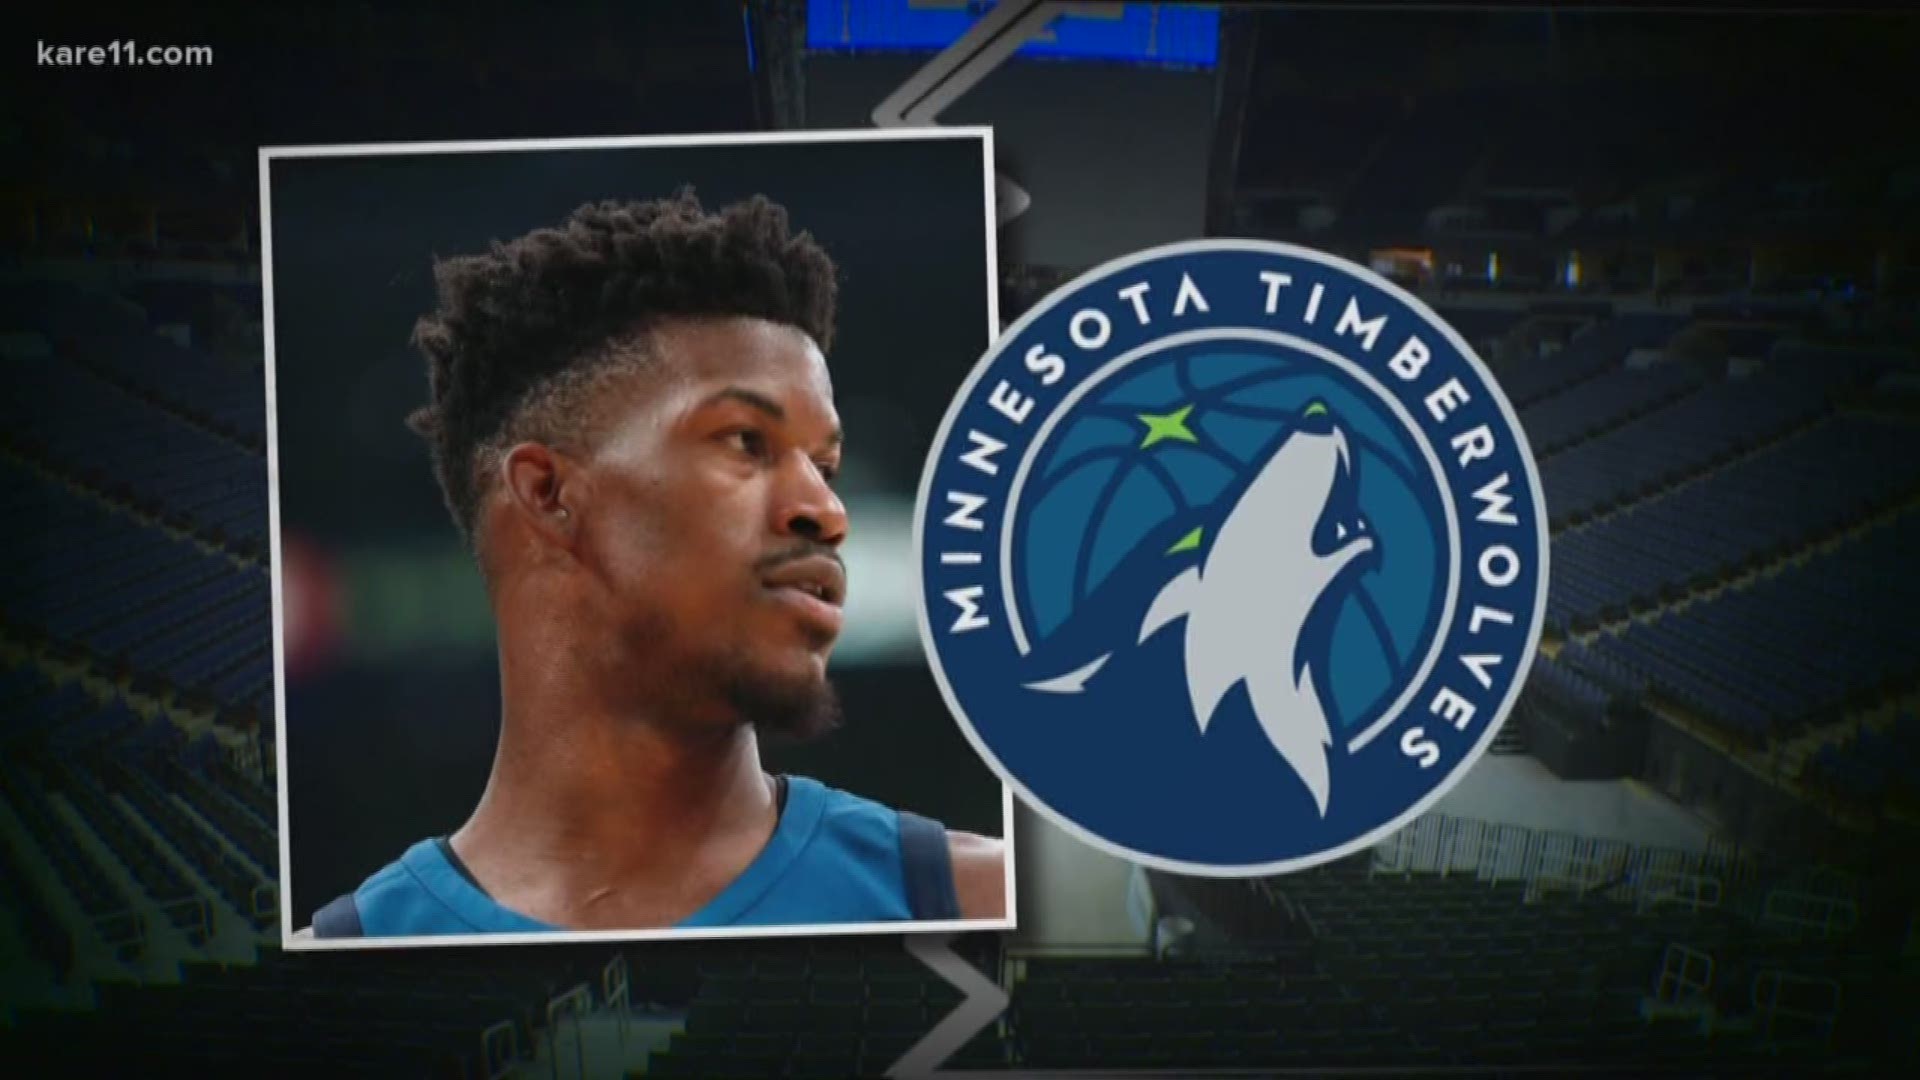 It's been weeks of an awkward breakup saga between star player Jimmy Butler and the Timberwolves. He's not playing and he wants to be traded...now!